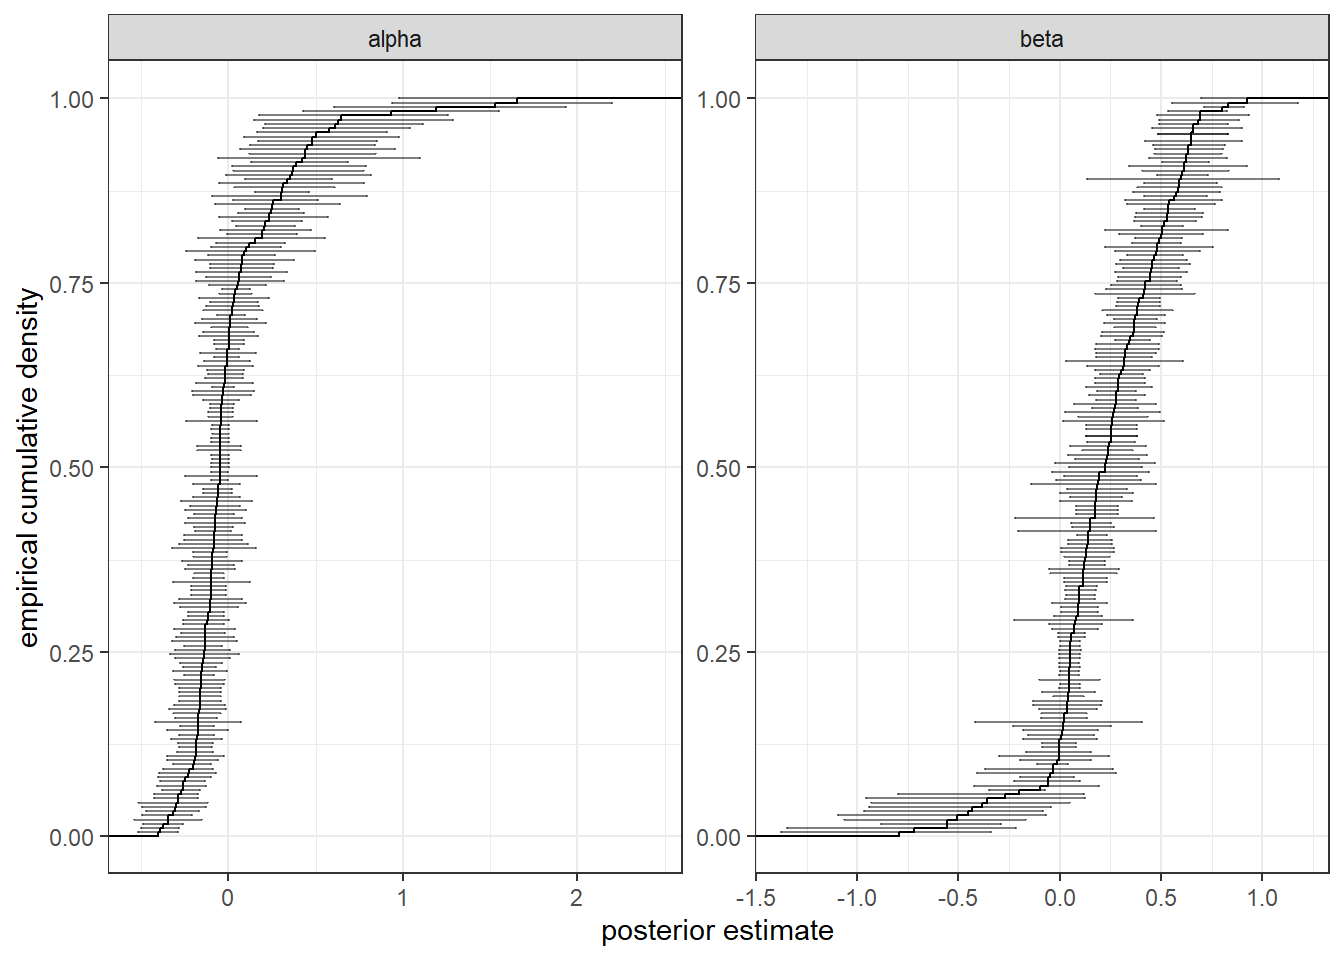 Empirical cumulative density functions of posterior mean estimates for $\alpha$ and $\beta$. Error bars show 95% Bayesain credible regions for the parameter.